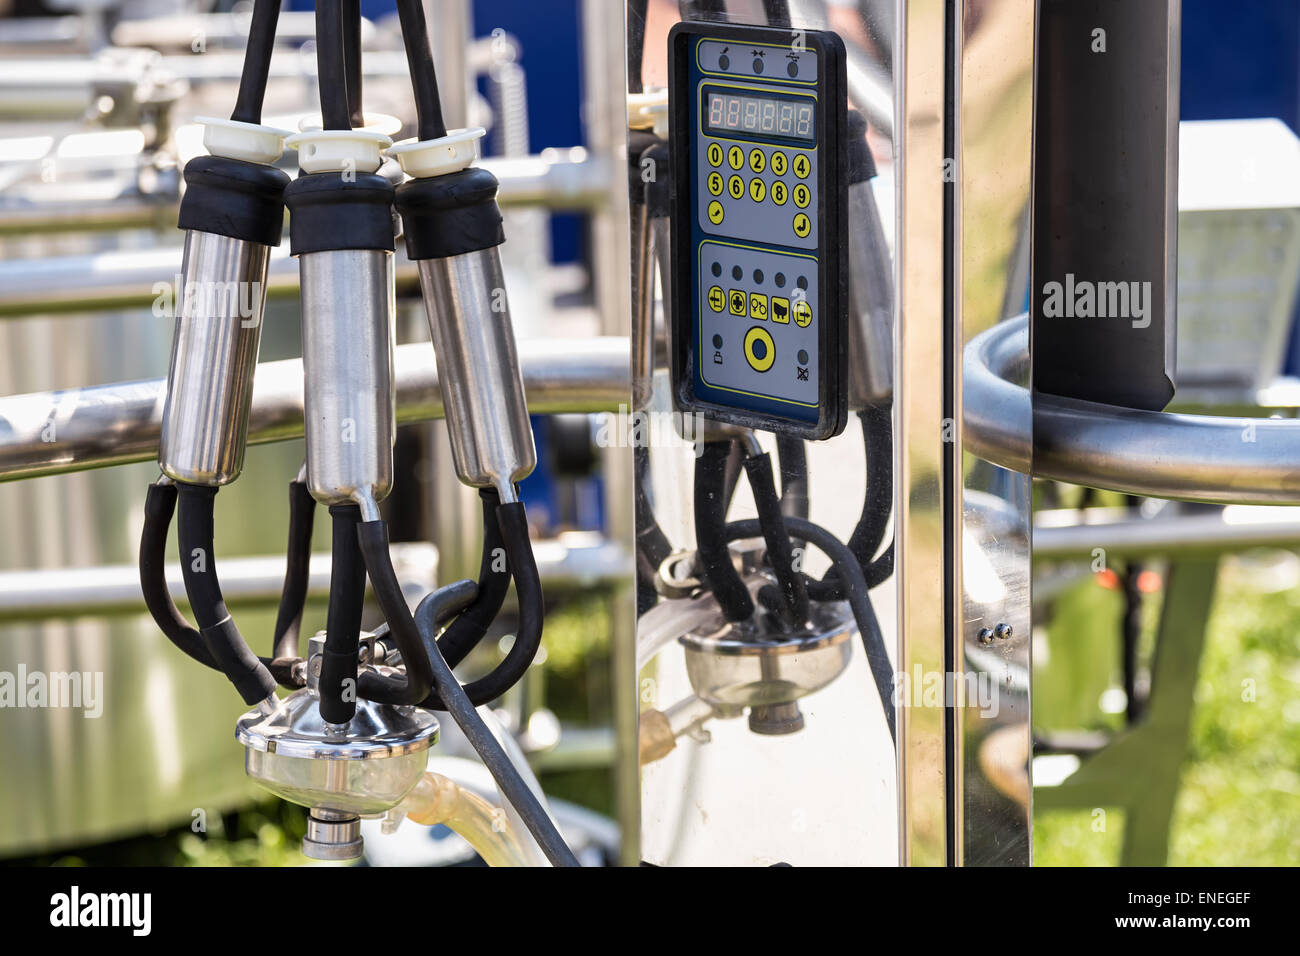 Automated mechanized milking equipment closeup for farmland industry Stock Photo